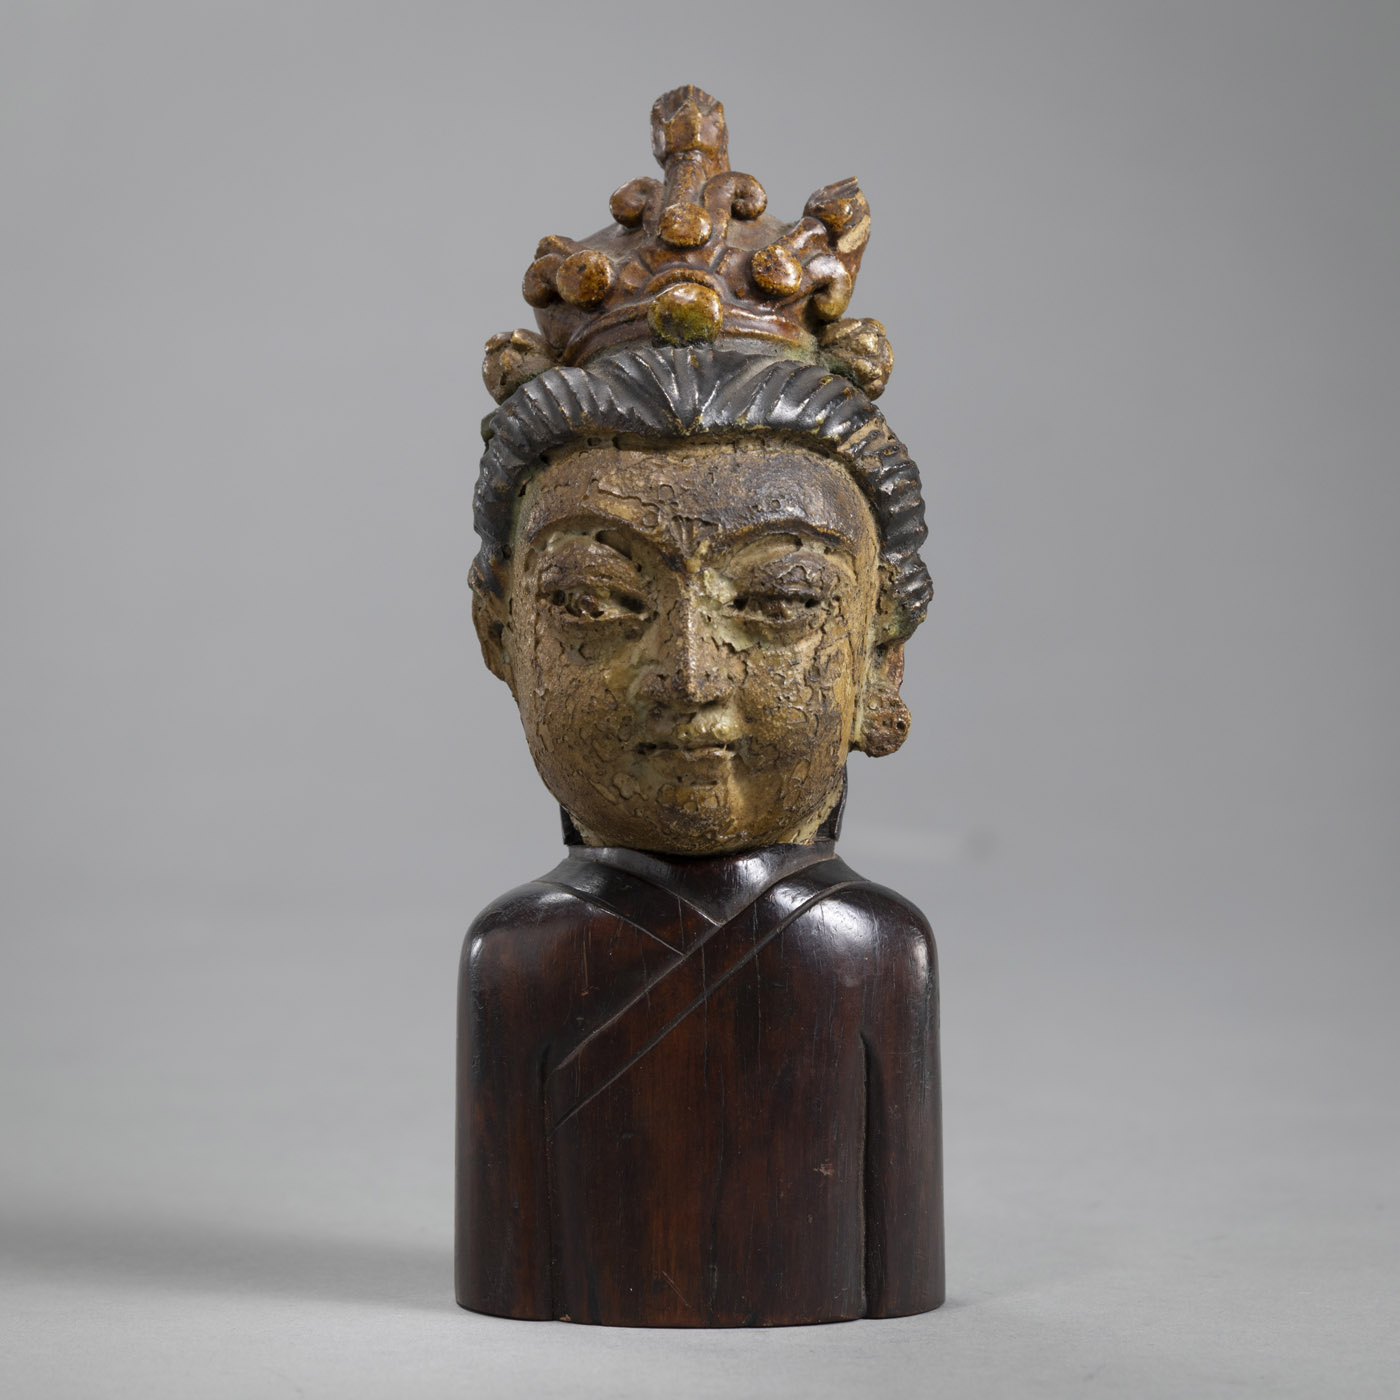 A SMALL PARTLY PAINTED TERRACOTTA GUANYIN HEAD ON A WOOD STAND IN THE FORM OF A TORSO